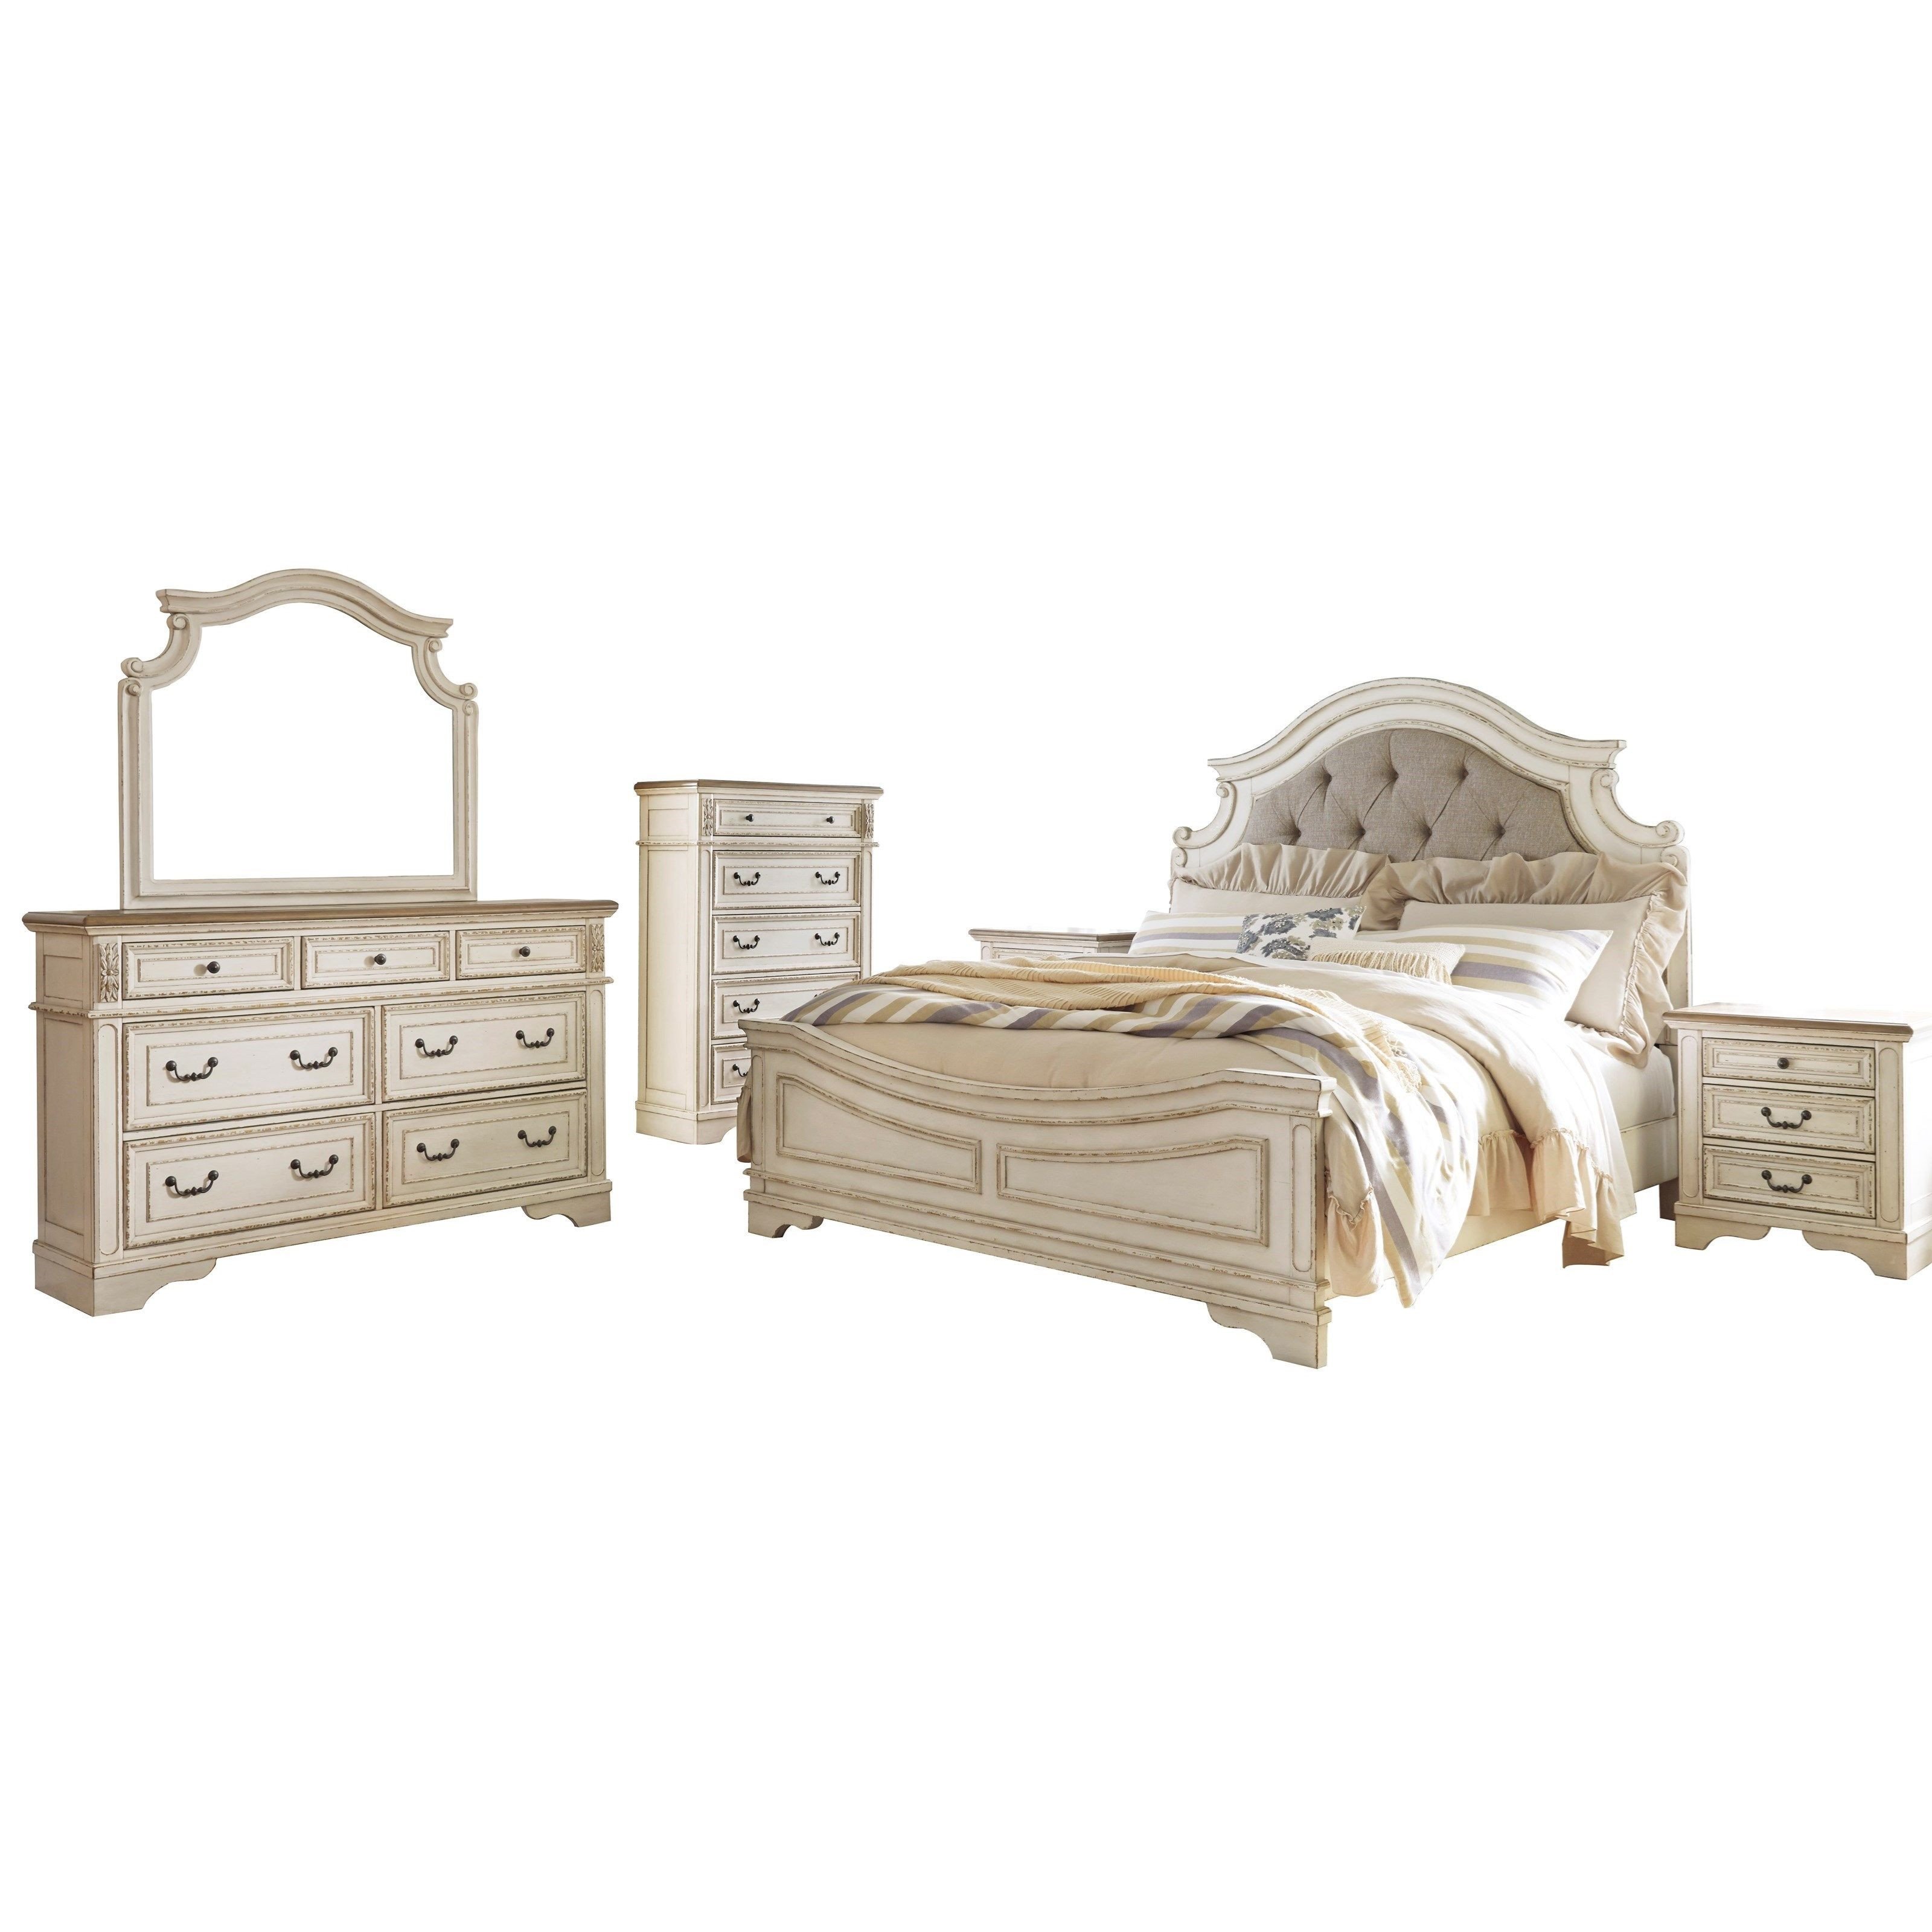 Signature Design by ashley Bedroom Set Fresh Realyn Queen Bedroom Group by Signature Design by ashley In